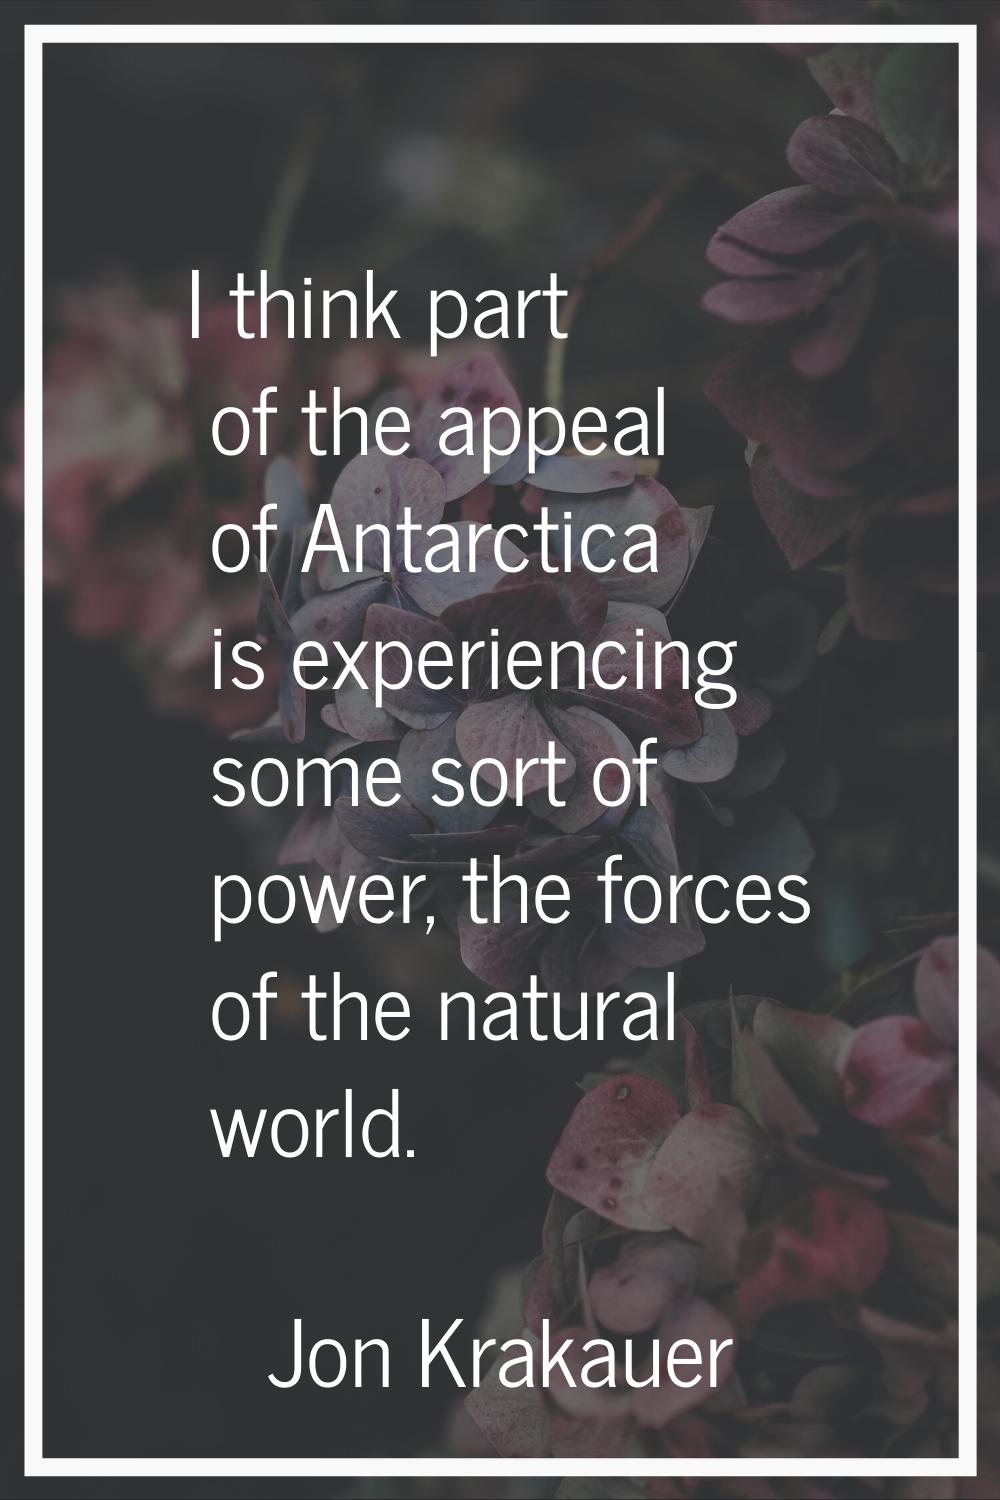 I think part of the appeal of Antarctica is experiencing some sort of power, the forces of the natu